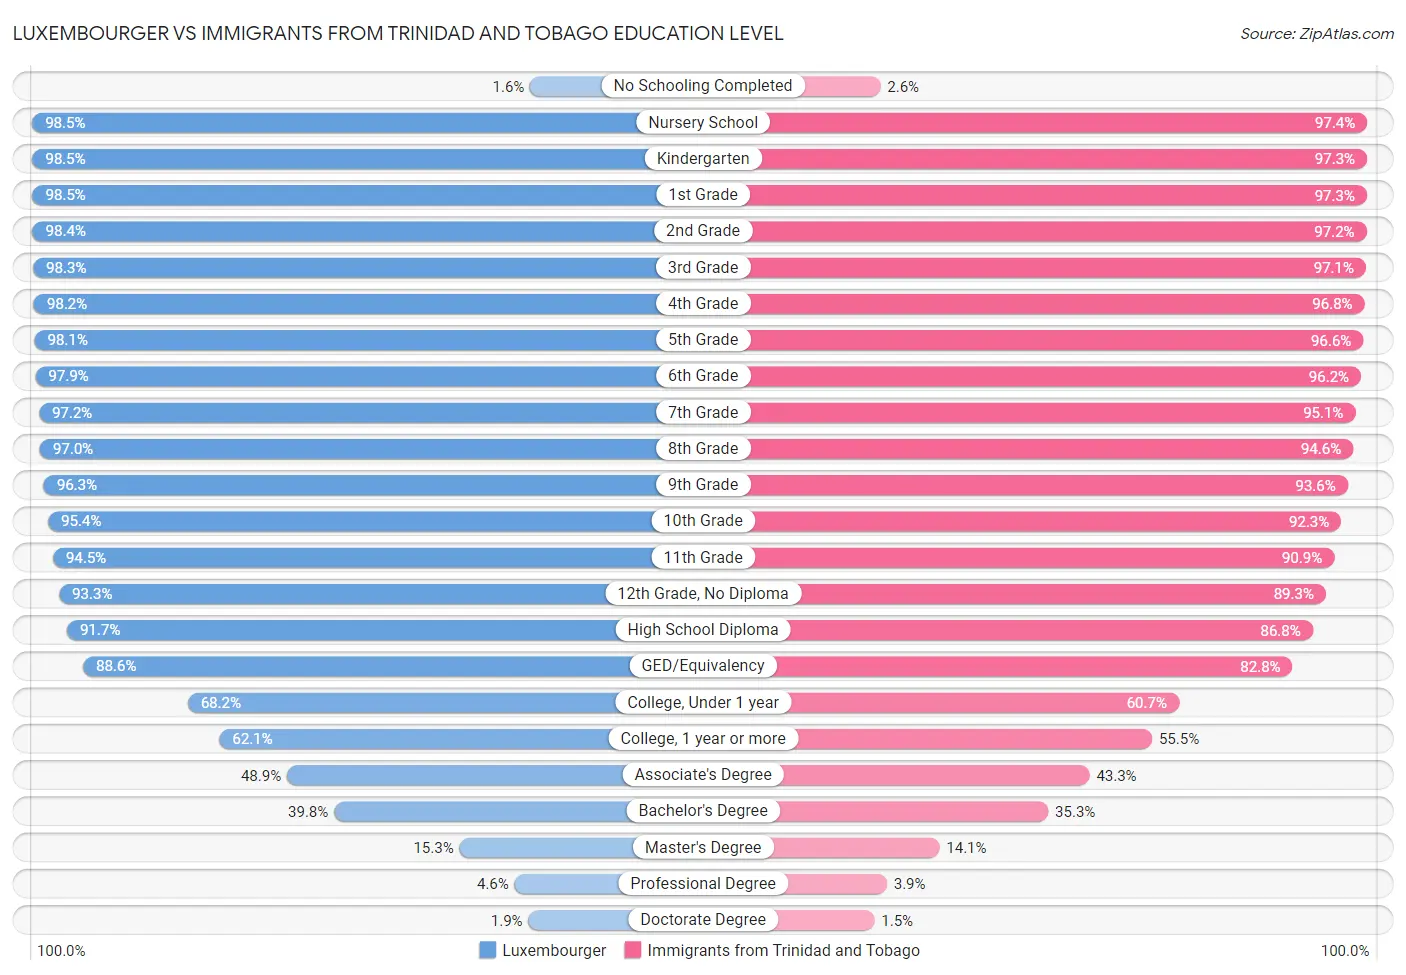 Luxembourger vs Immigrants from Trinidad and Tobago Education Level